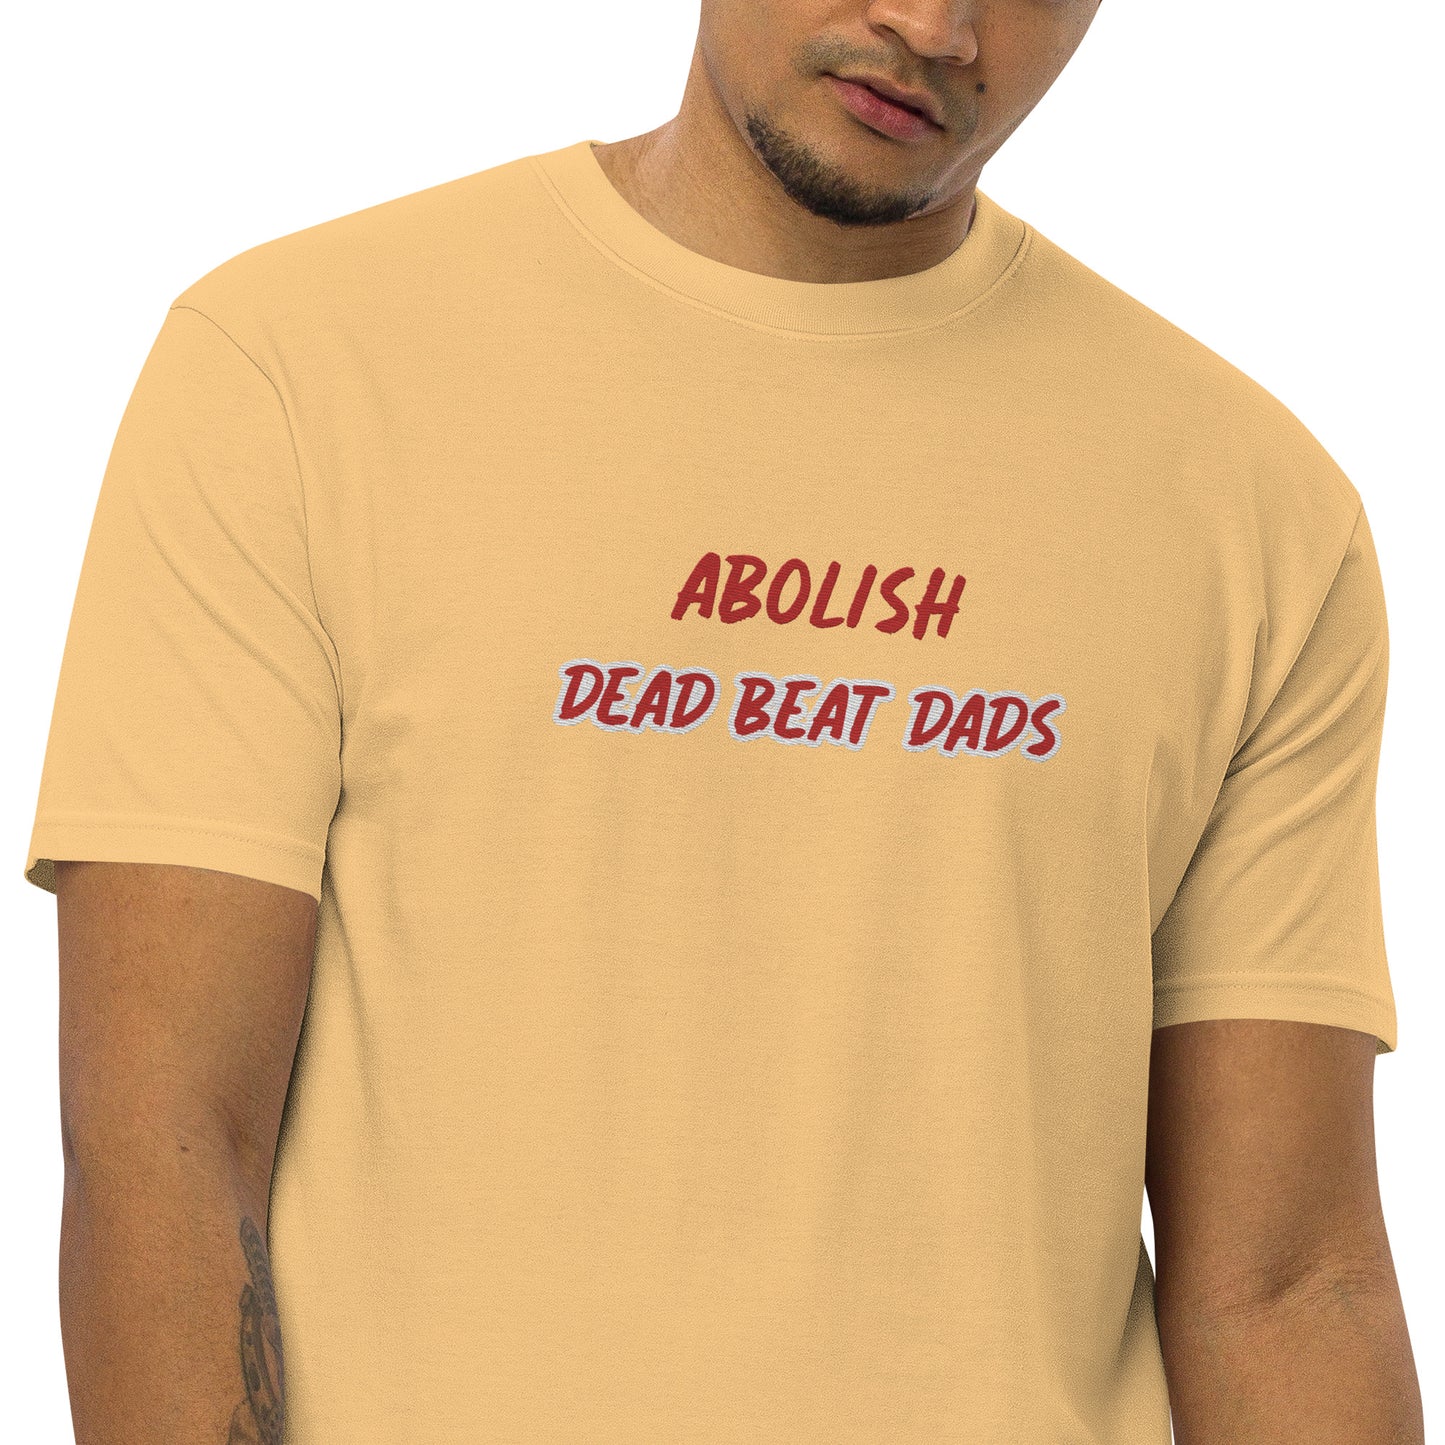 Abolish Dead Beat Dad's Embroidered Men's Heavyweight T-Shirt